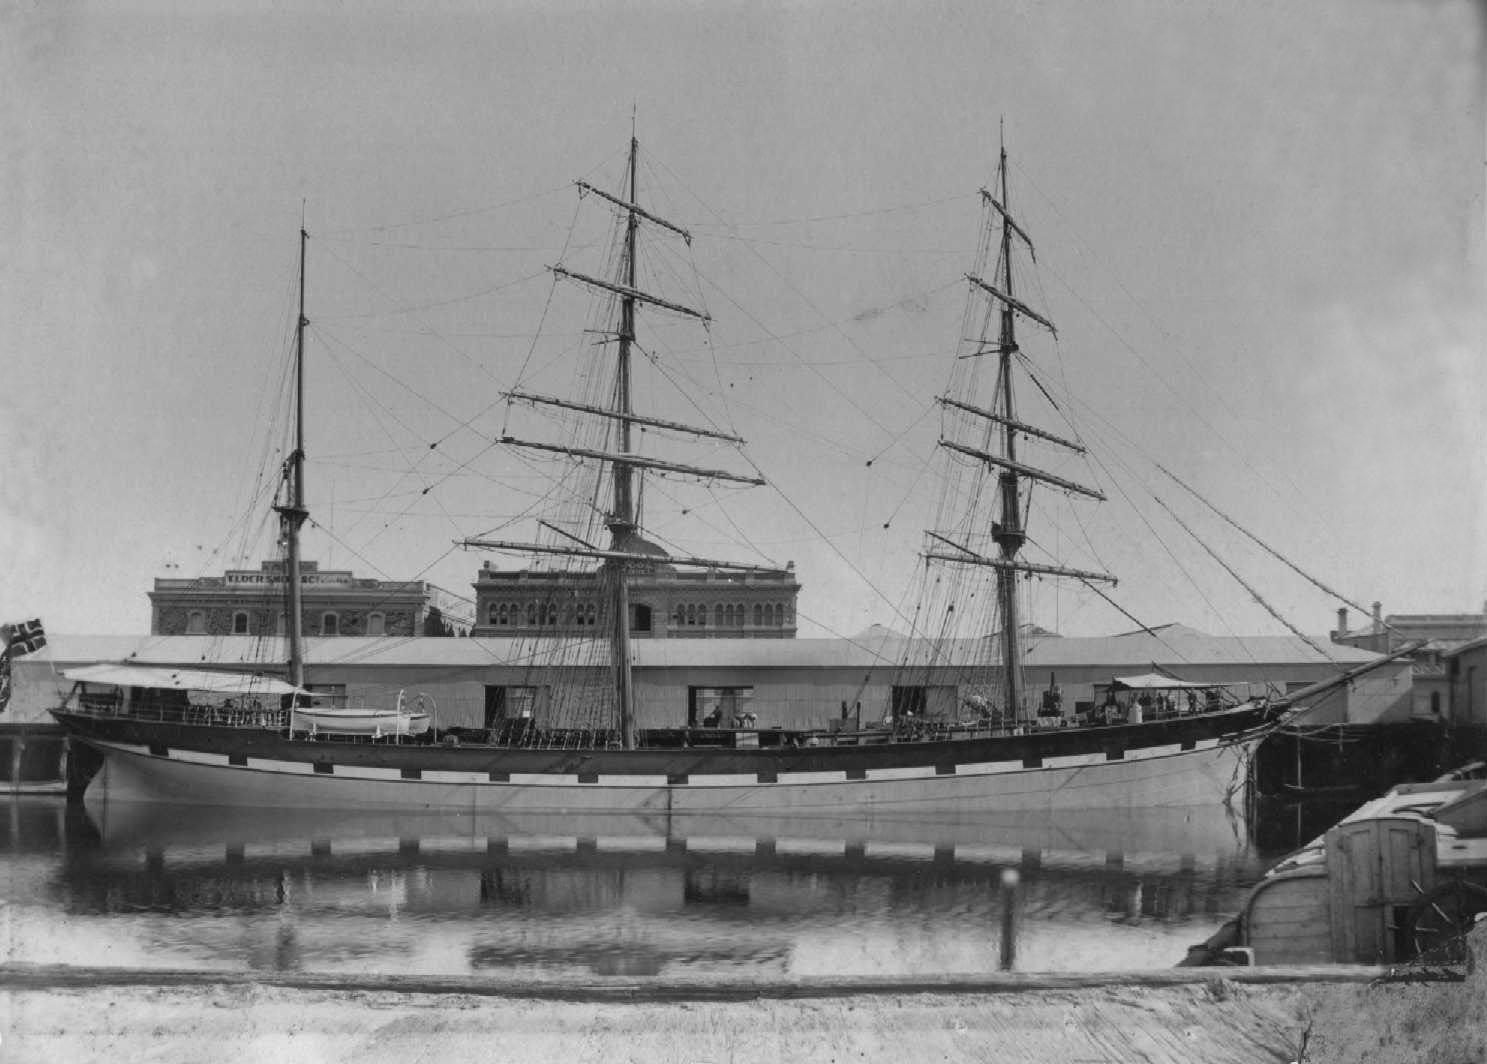 Three masted Steel Barque "Bonovento" of Larvik.  Built in 1892 at Arendal.
Tonnage:  1341 gross, 1271 net
Dimensions:  length 229'9", breadth 37'0", draught 20'6"
Captain:  O Pedersen in 1899.